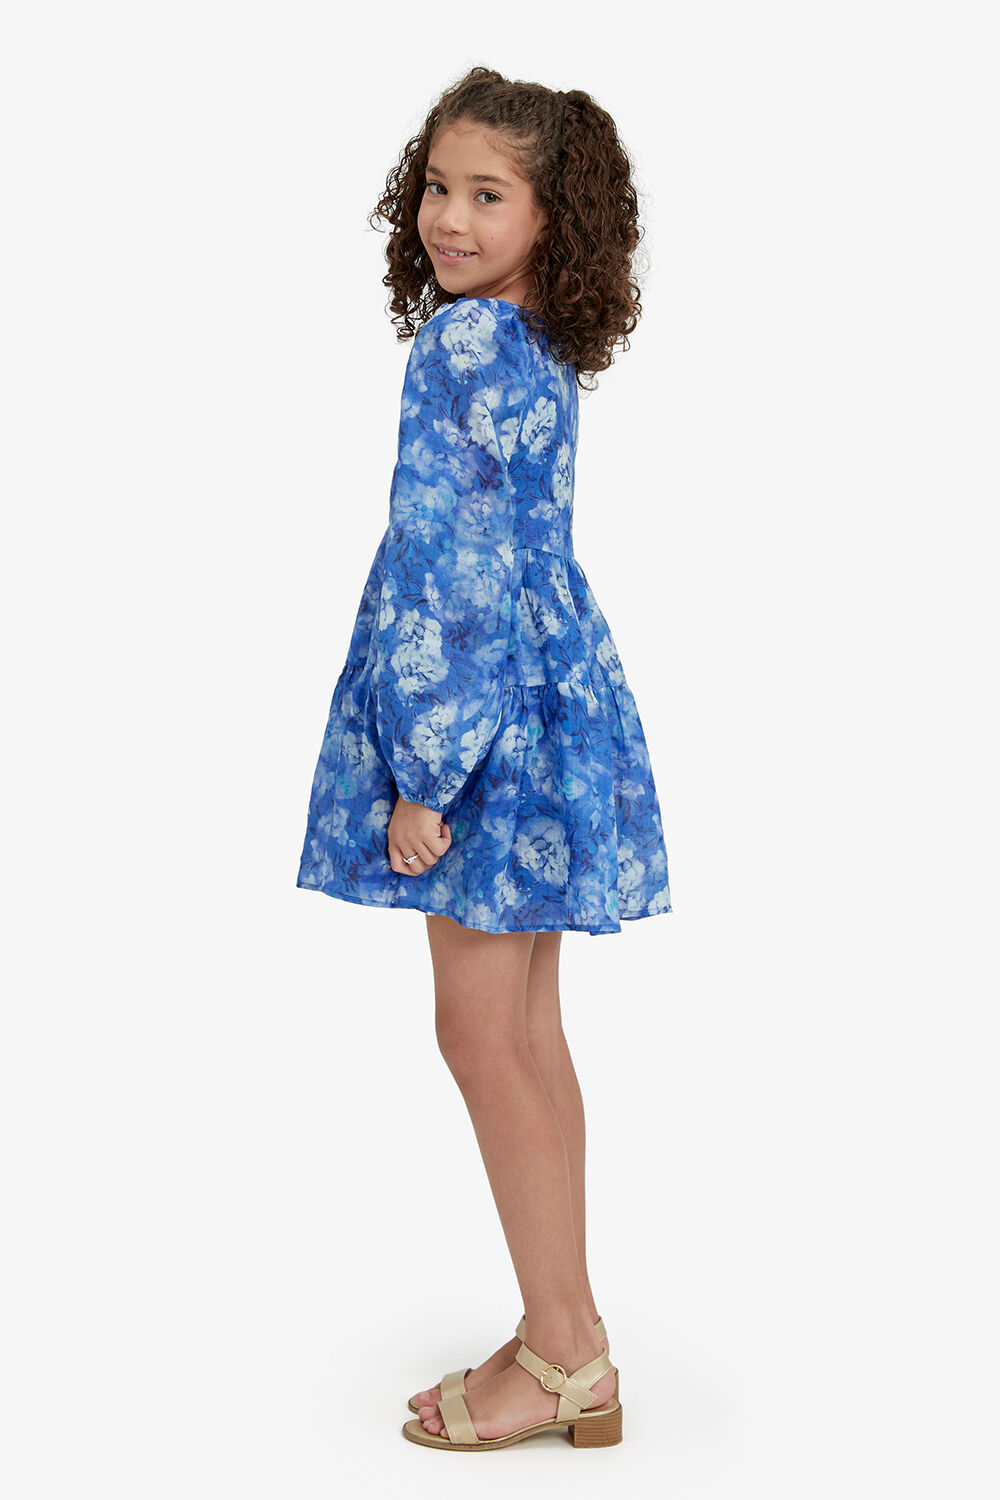 GIRLS AIRLEA FLORAL  DRESS in colour ROYAL BLUE